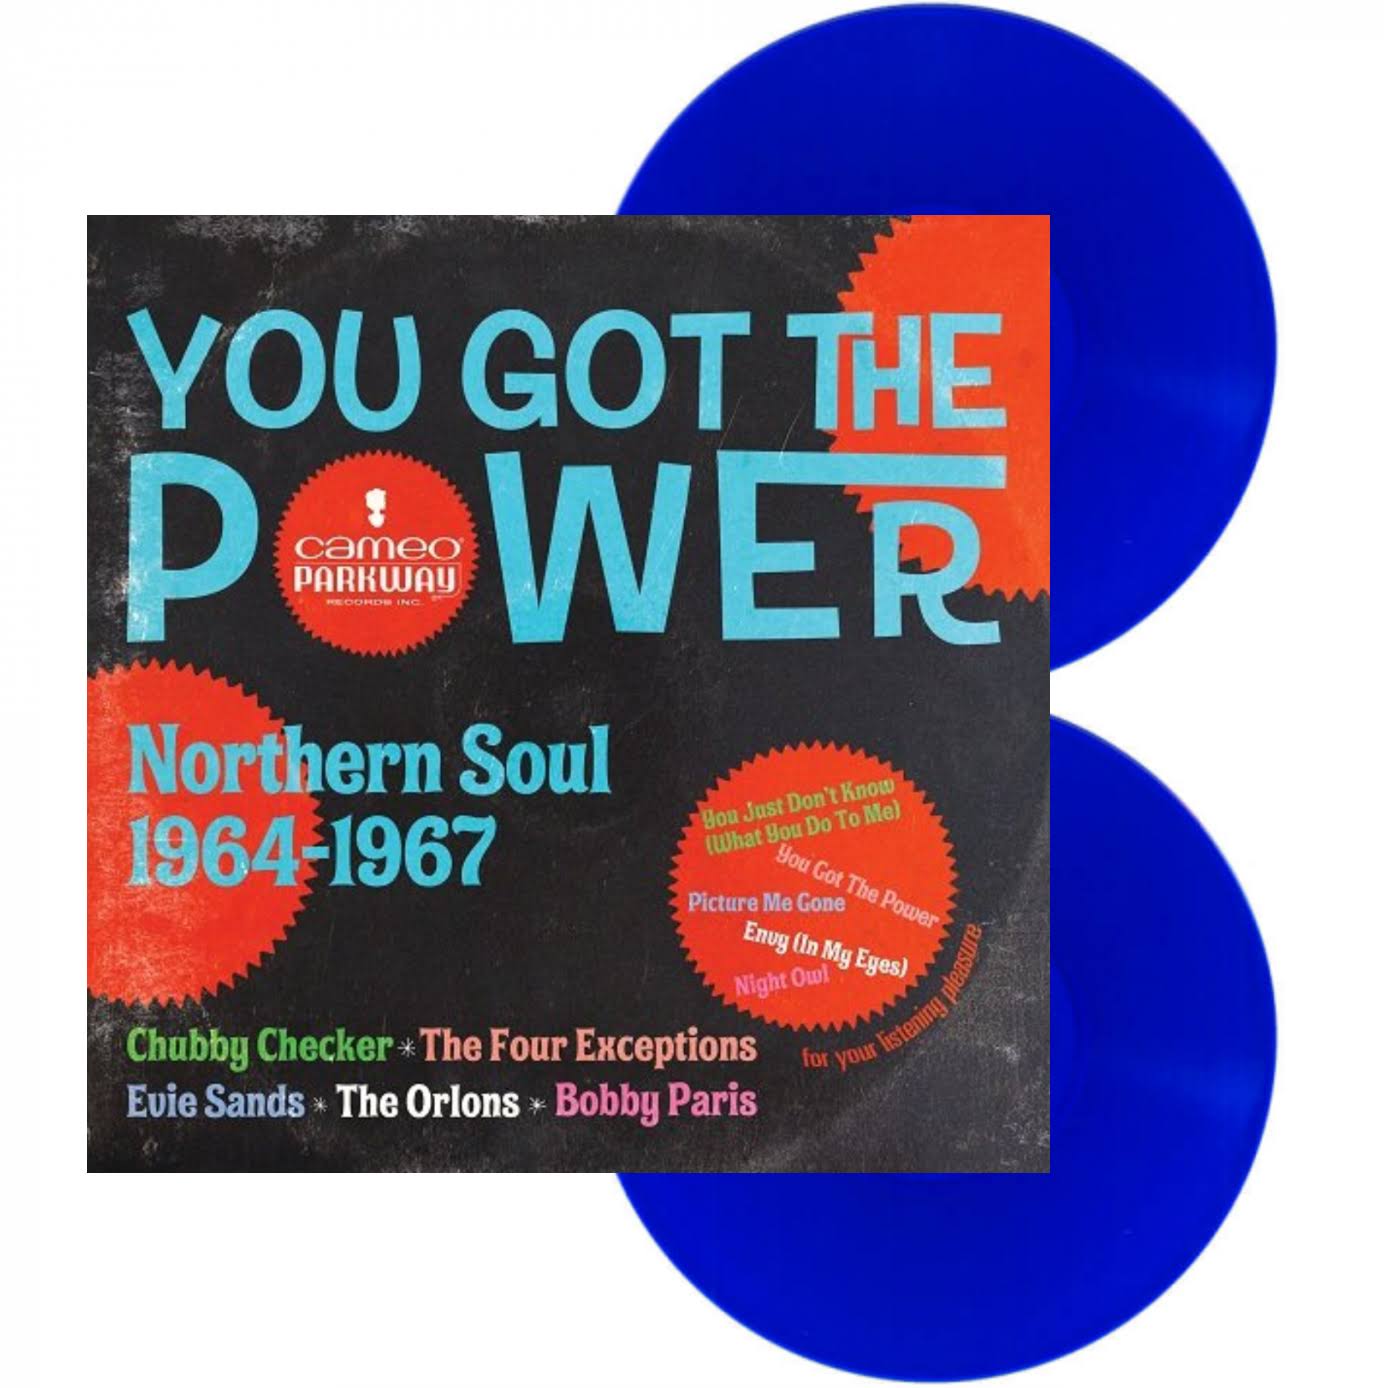 You Got The Power: Cameo Parkway Northern Soul (1964-1967) - Various Artists - Vinyl